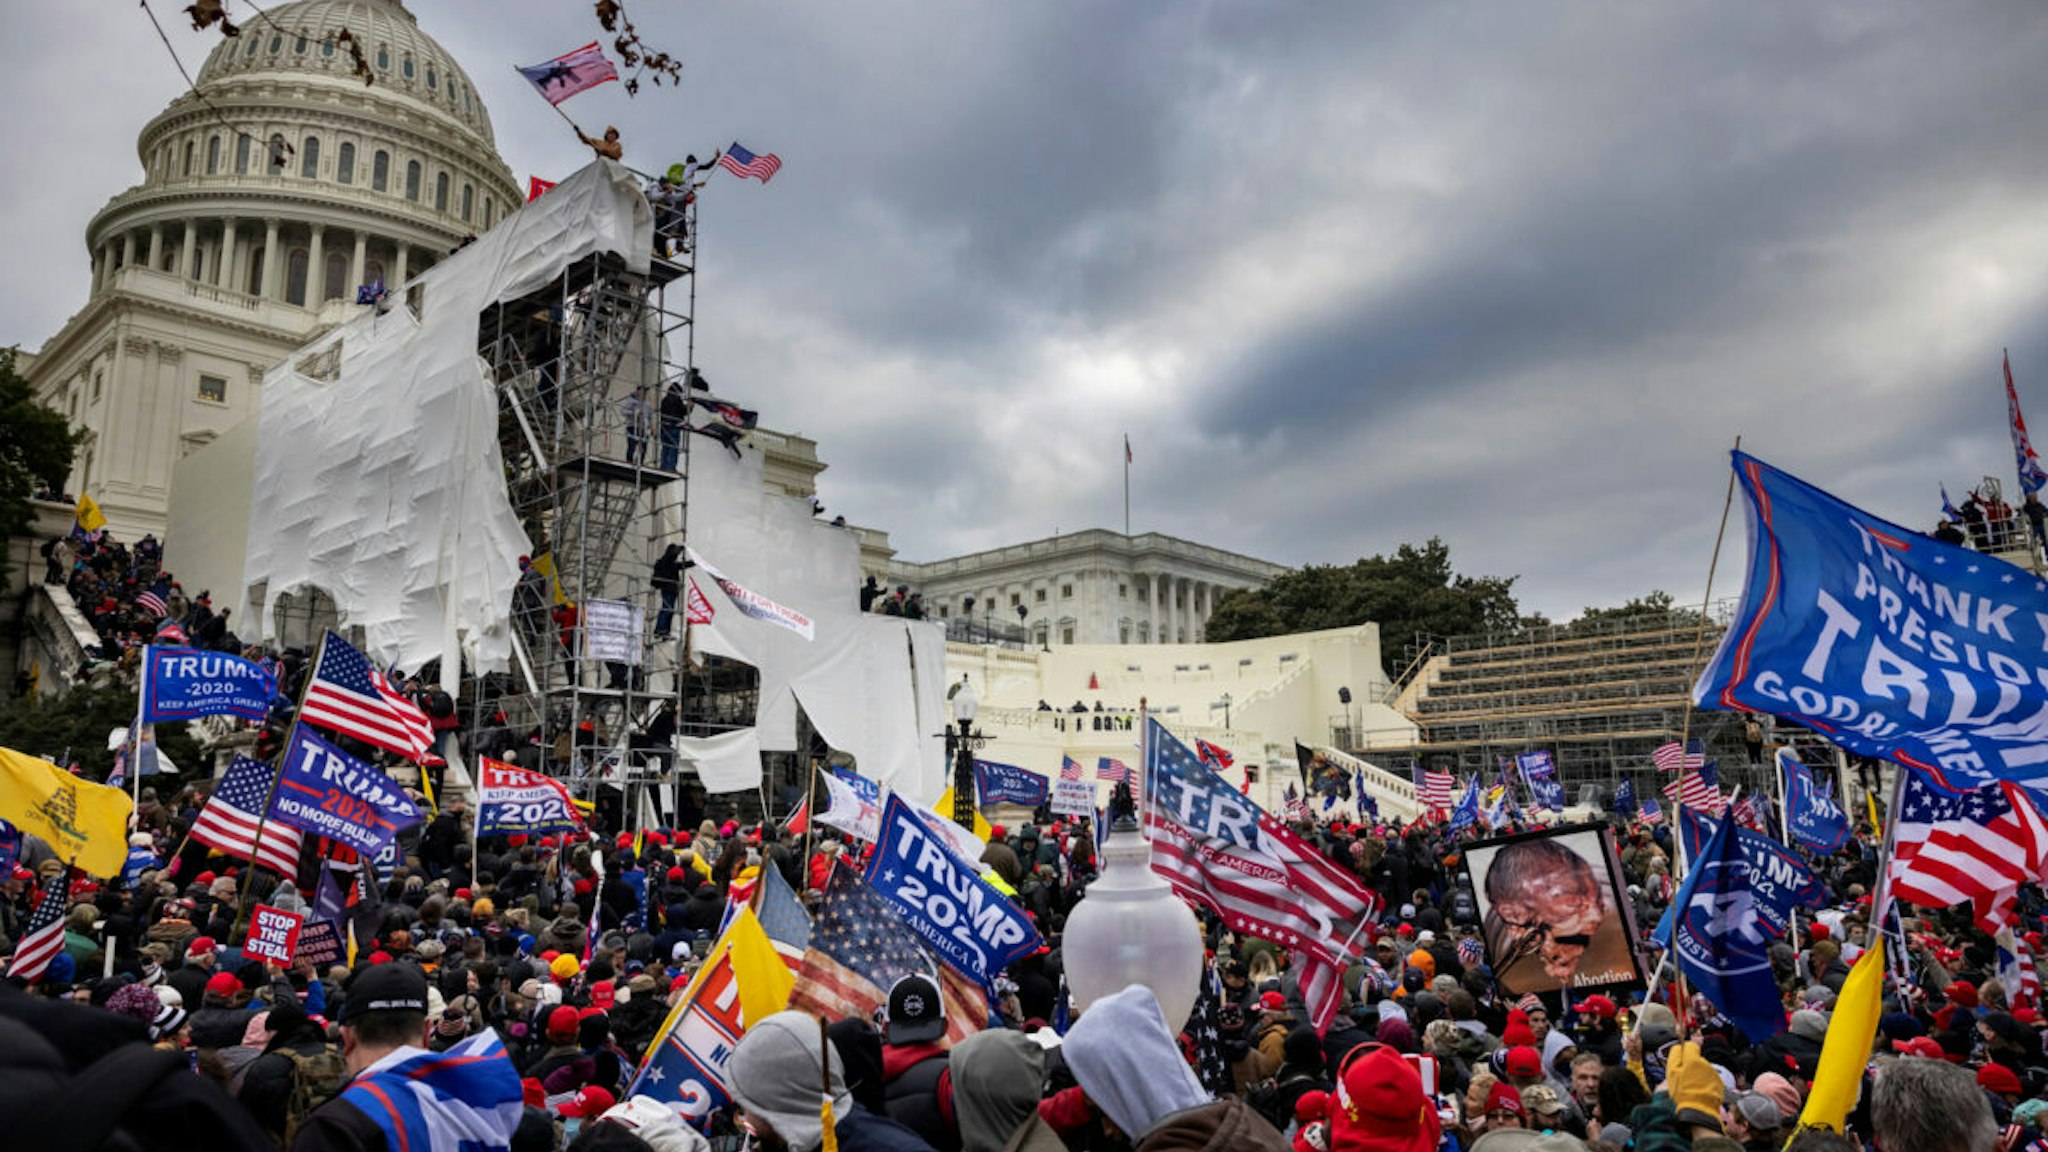 WASHINGTON, DC - JANUARY 6: Trump supporters clash with police and security forces as people try to storm the US Capitol on January 6, 2021 in Washington, DC. Demonstrators breeched security and entered the Capitol as Congress debated the 2020 presidential election Electoral Vote Certification.